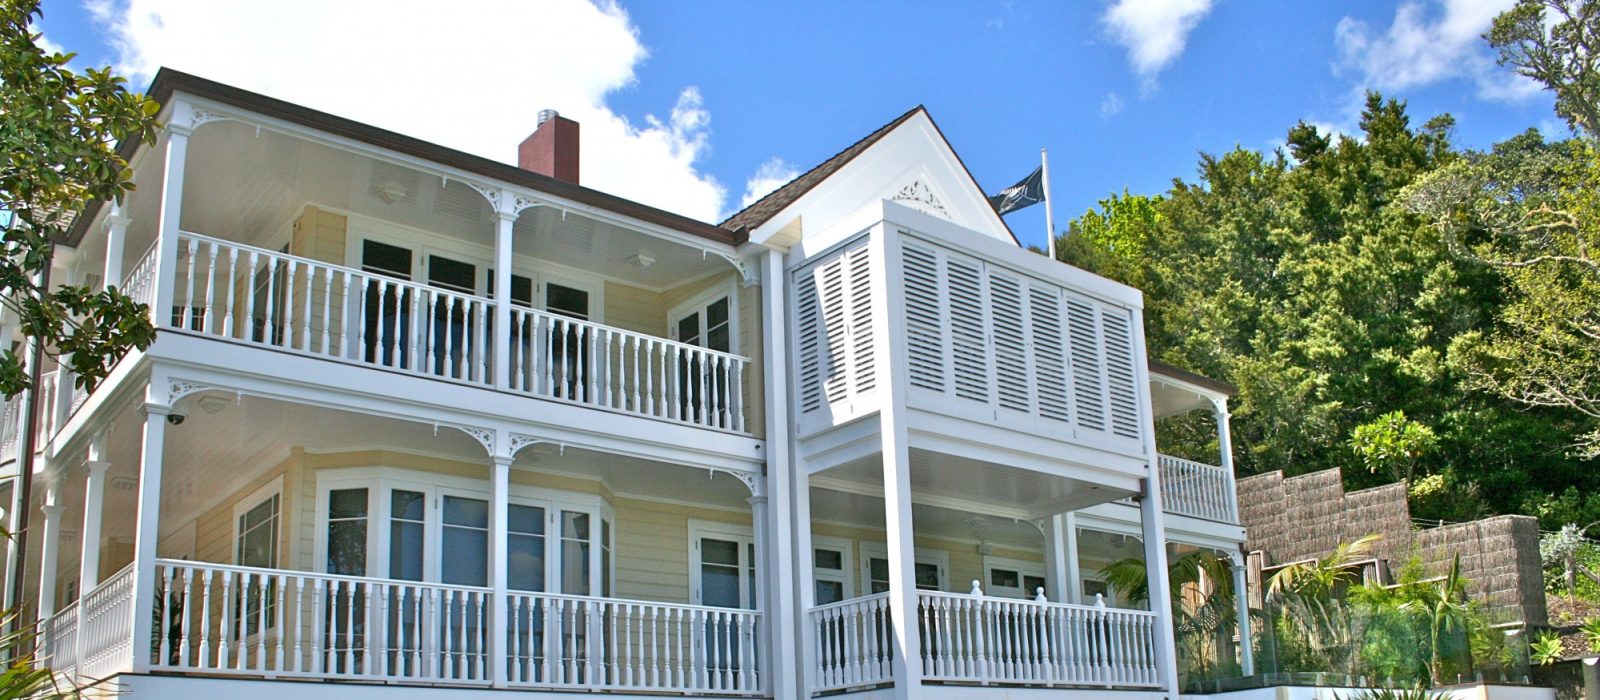 Colonial Style - Header Image